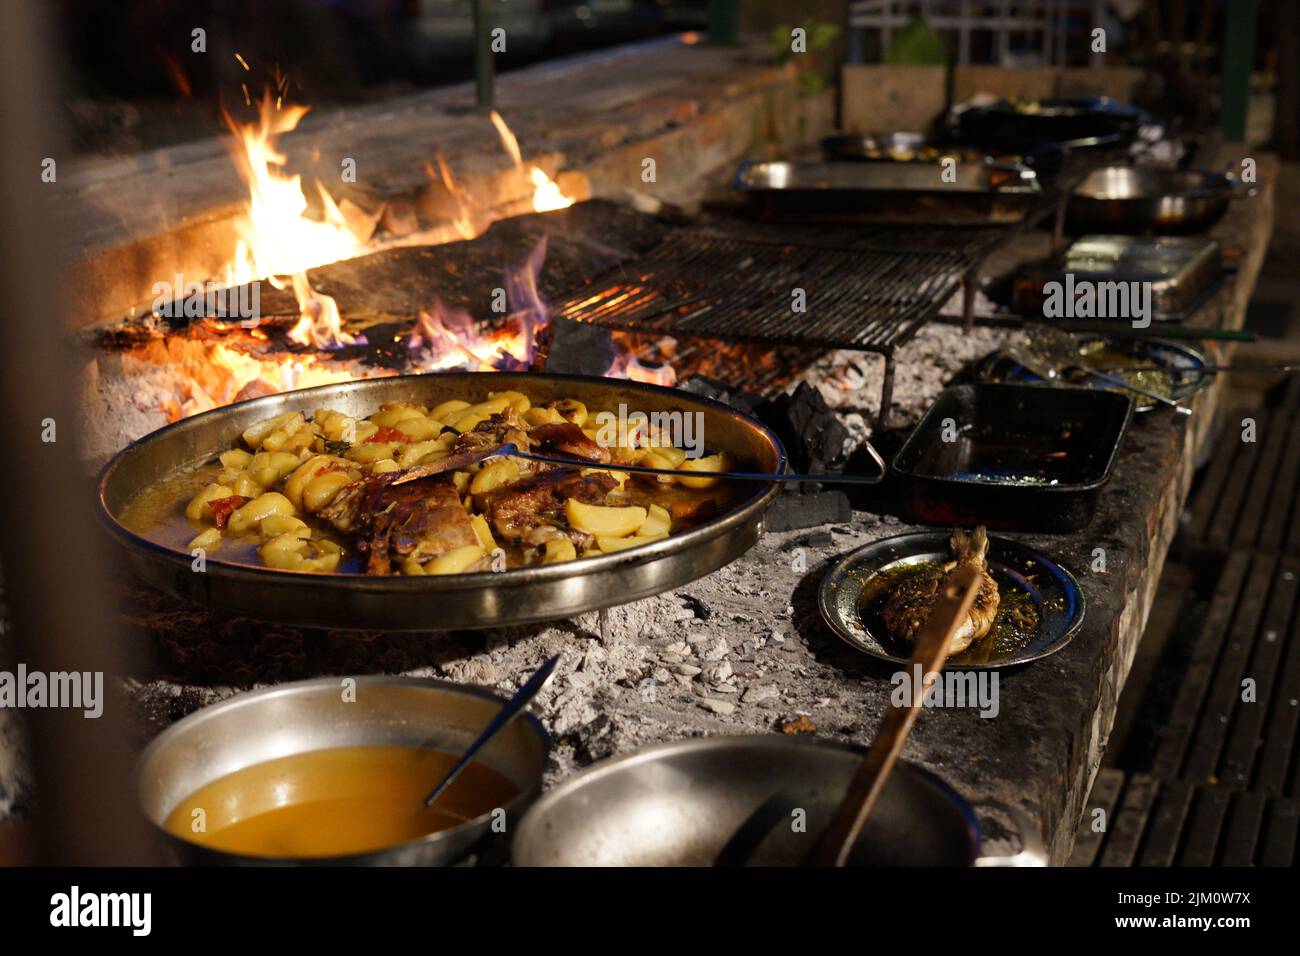 A barbecue grill with flames, potatoes, meats, and sauces Stock Photo